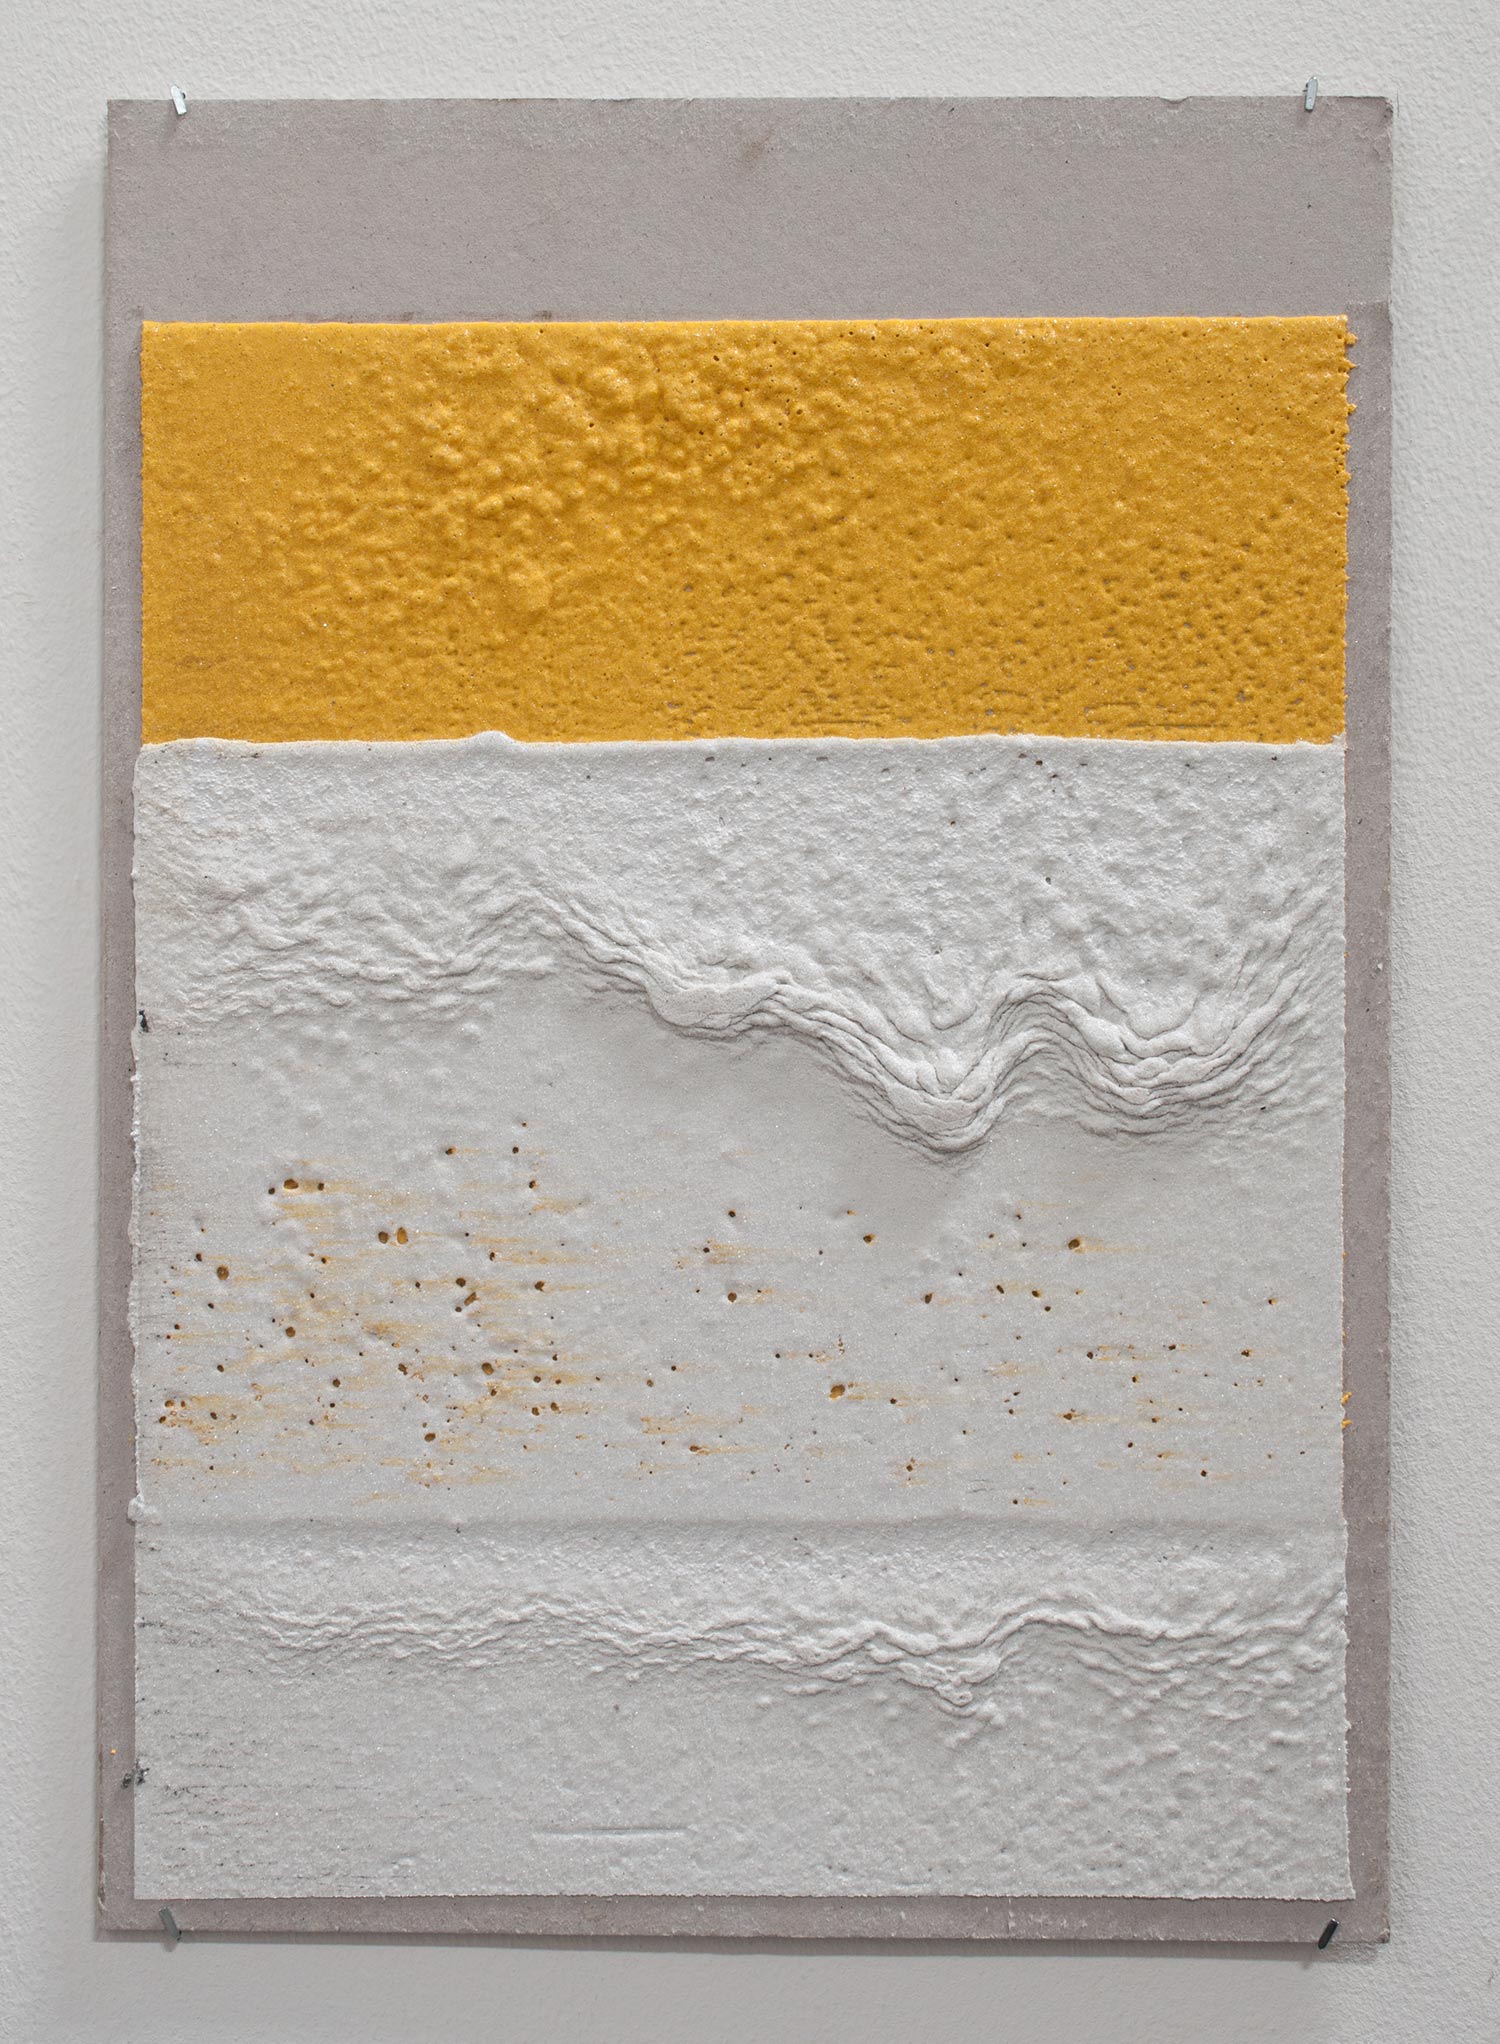   300mm (W), 2mm (T), Yellow, White, Random mark, hand marking, Al Barsha South, Unnamed street,  2017  Thermoplastic paint and reflective glass particles on grey board  35 x 50 cm 